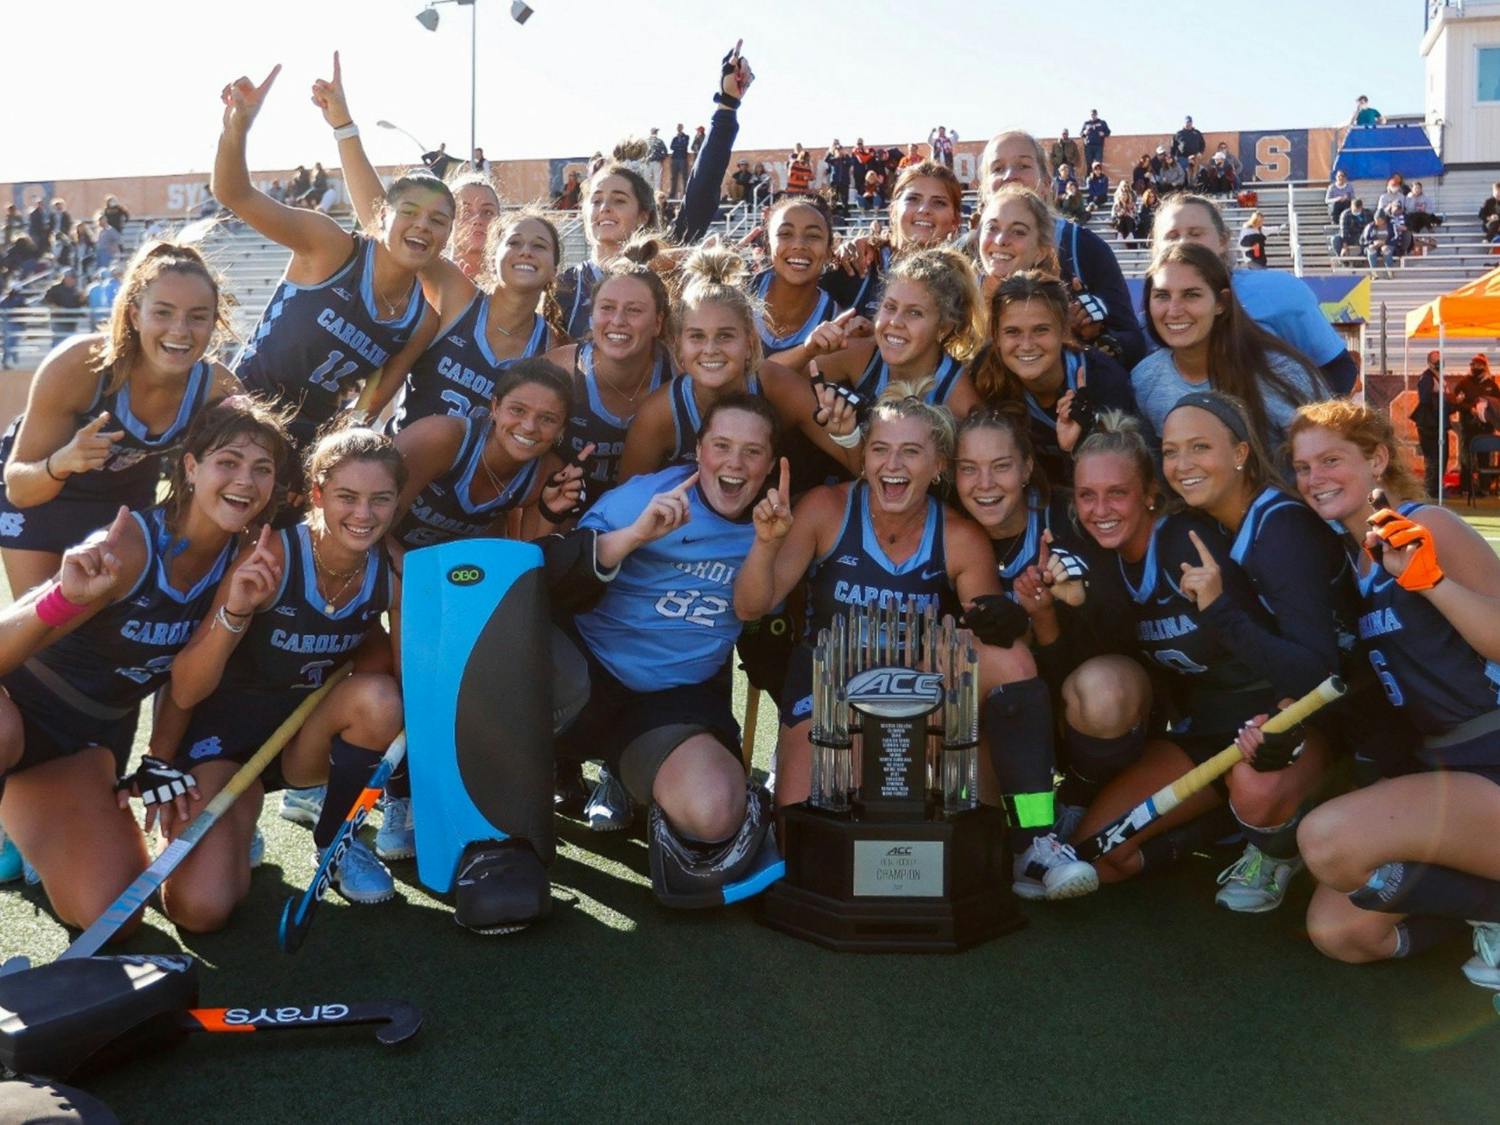 The field hockey team poses with the ACC Championship trophy after its victory on Nov. 7. Photo courtesy of UNC Athletic Communications.